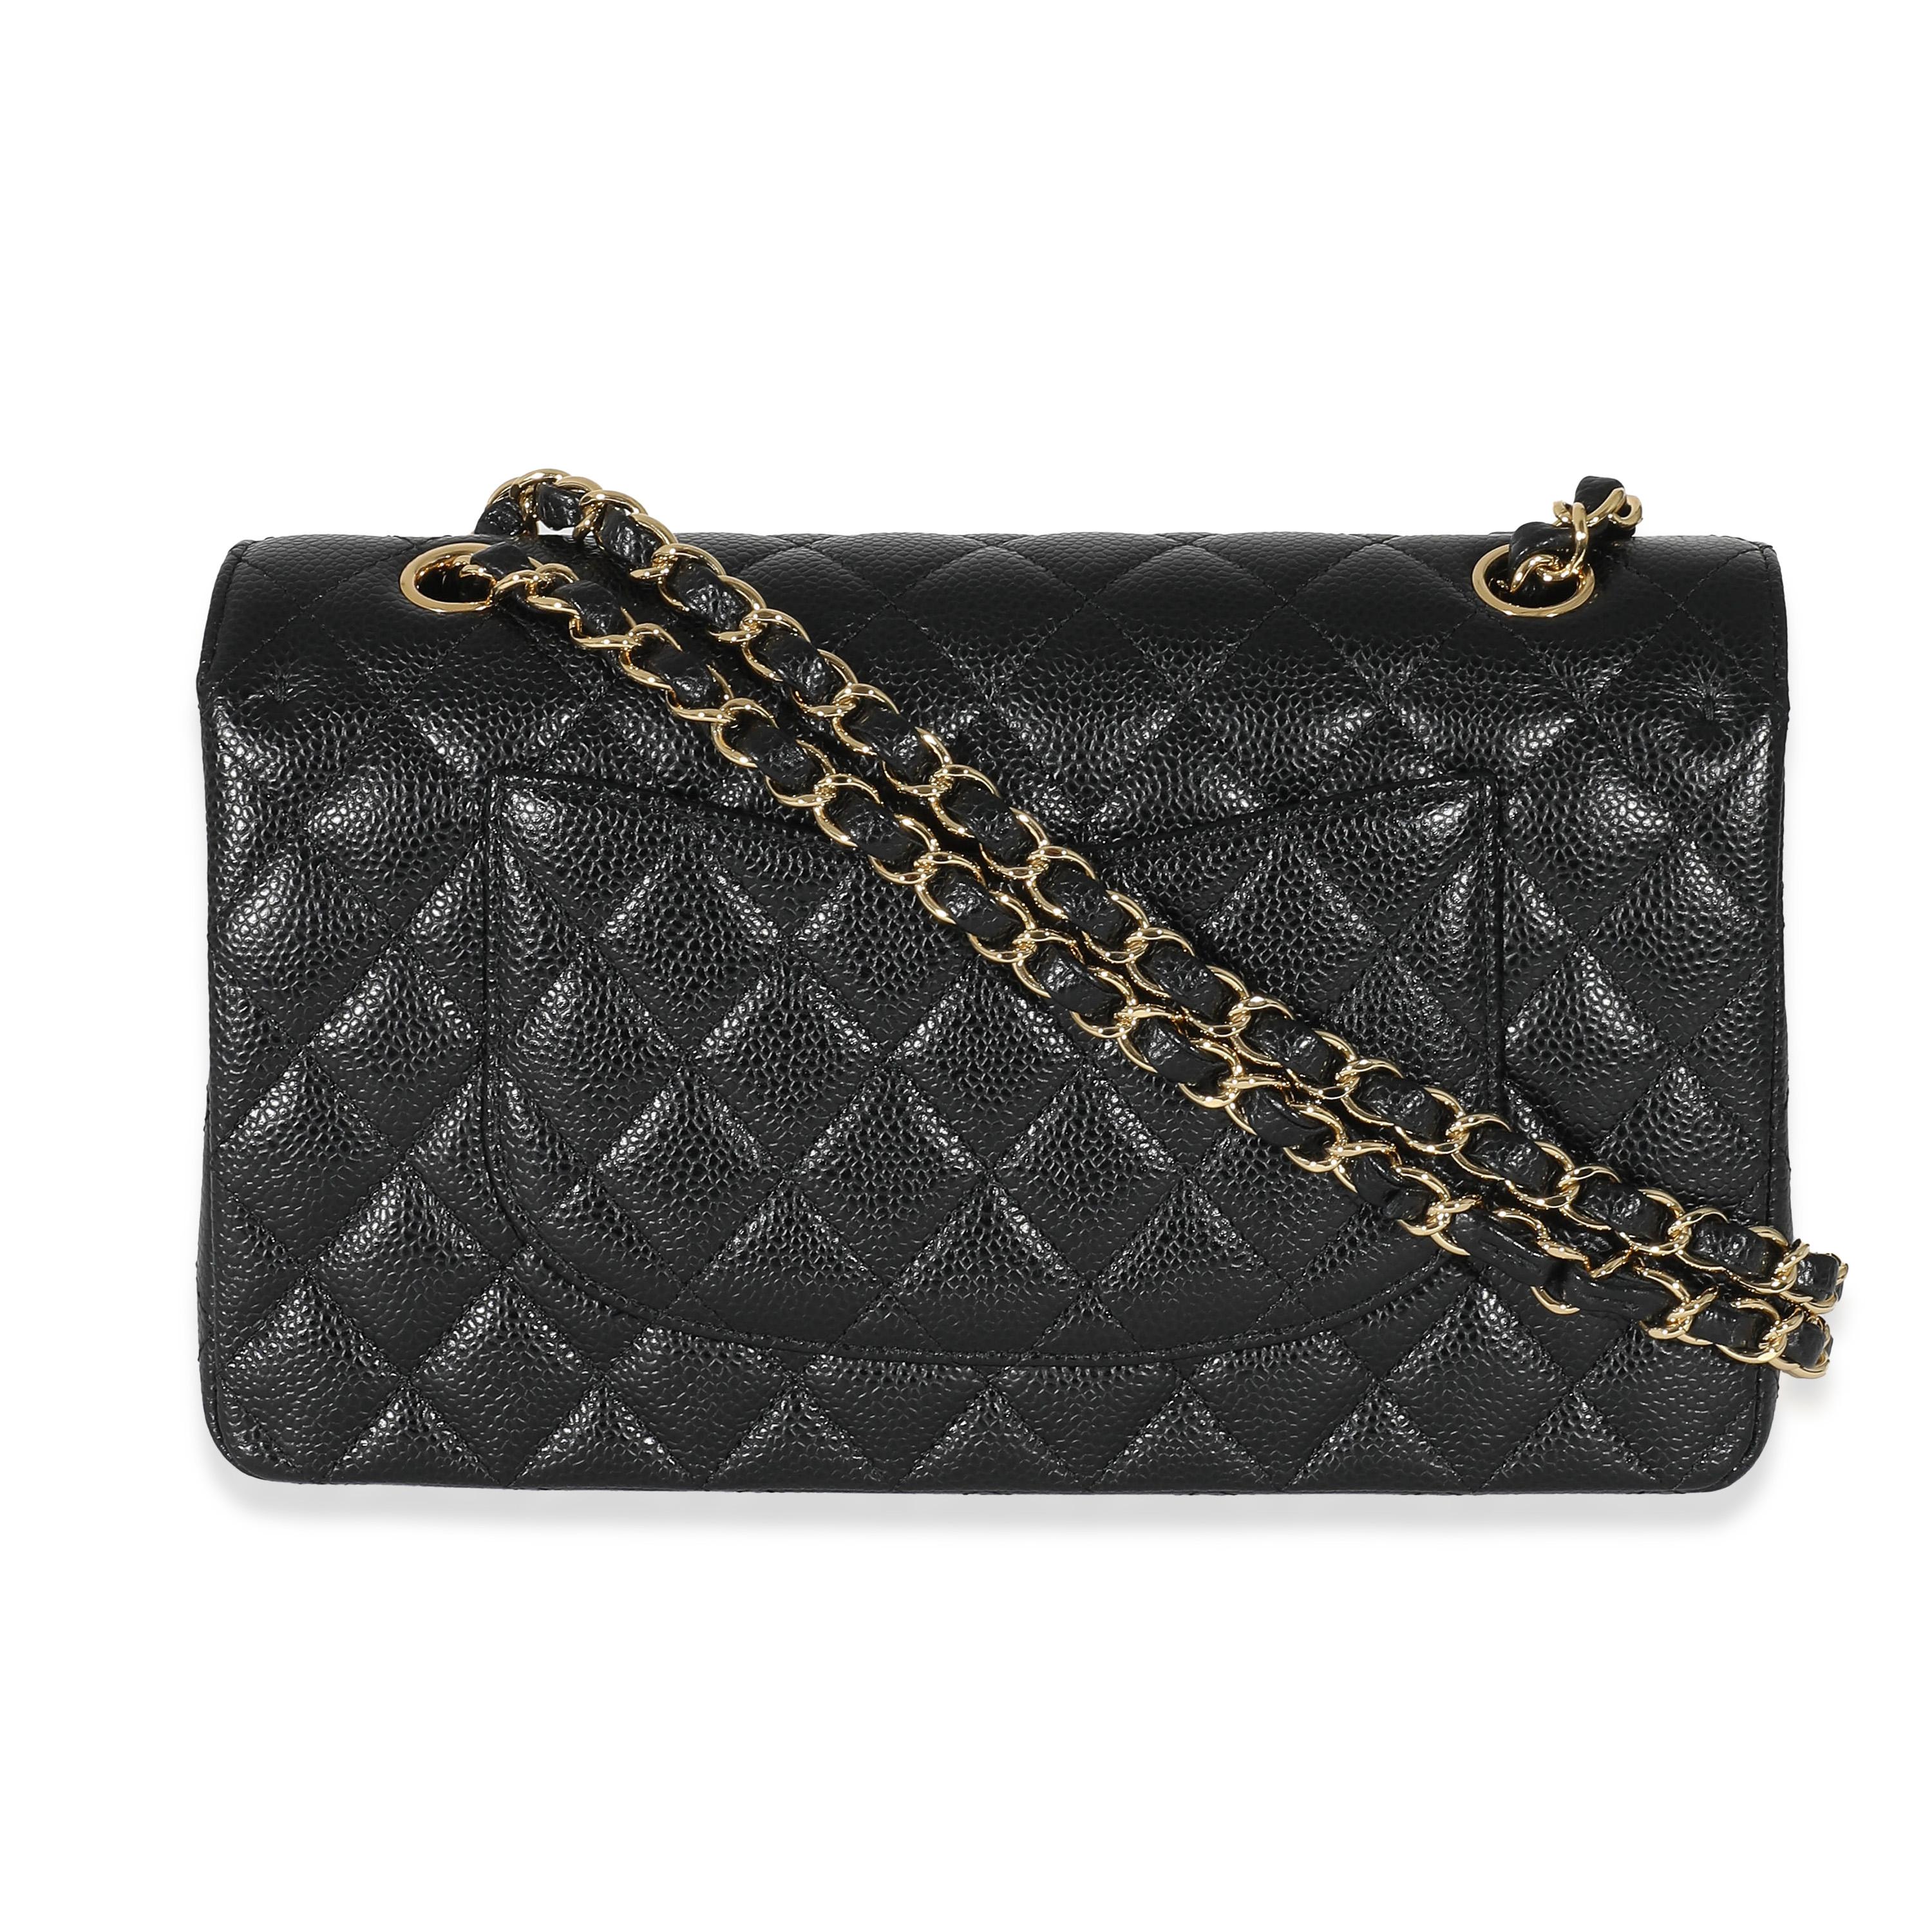 Chanel Black Caviar Medium Classic Double Flap Bag In Excellent Condition For Sale In New York, NY